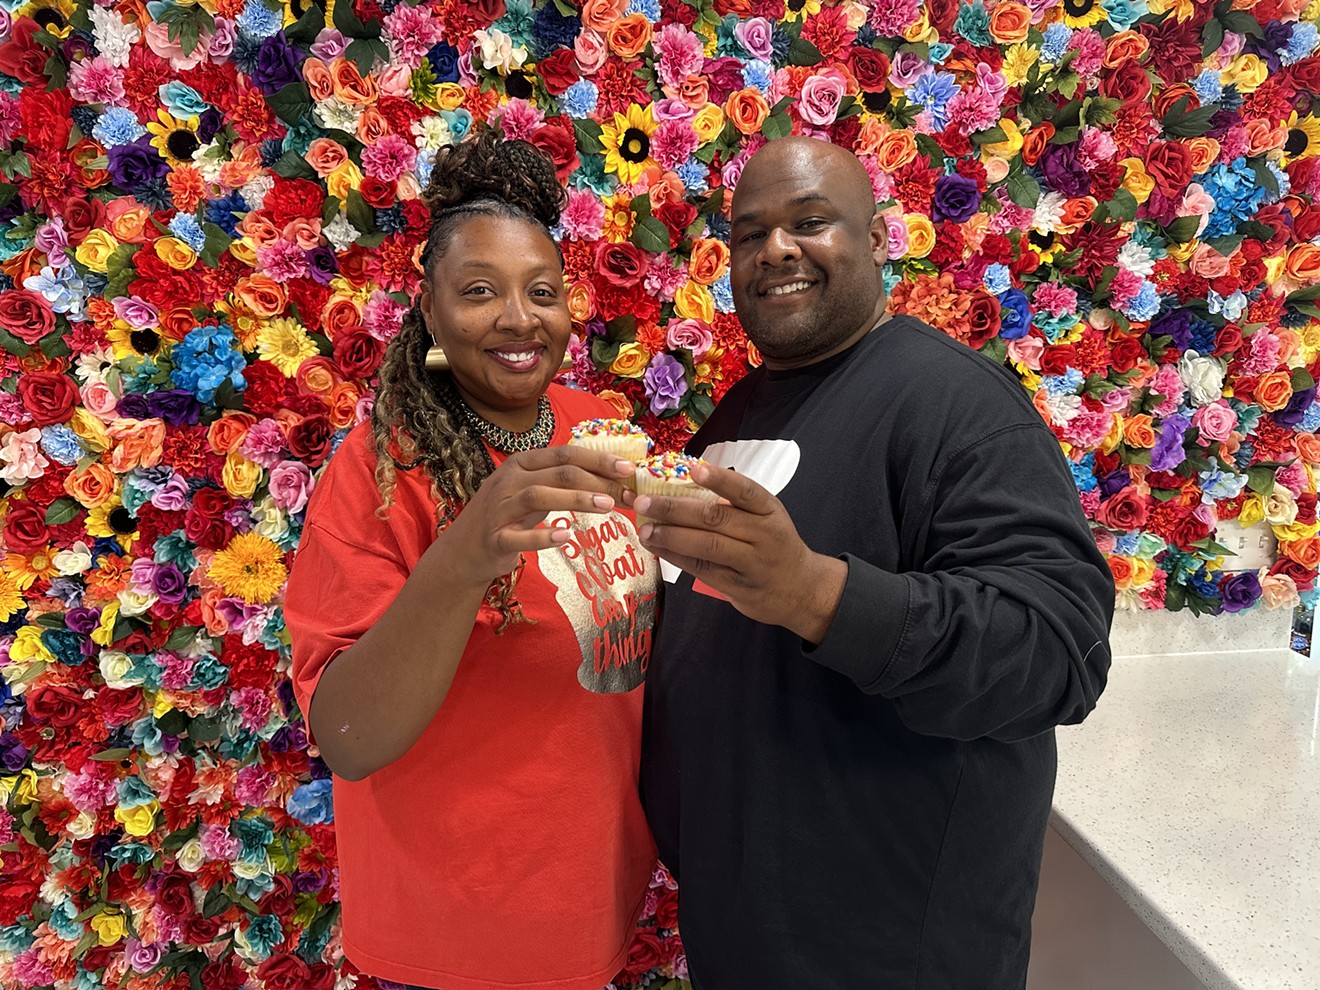 Myesha and Richard Harris plan to open Red Velvet Bakery in South Phoenix on Sept. 2, serving gourmet cupcakes, milkshakes and more.